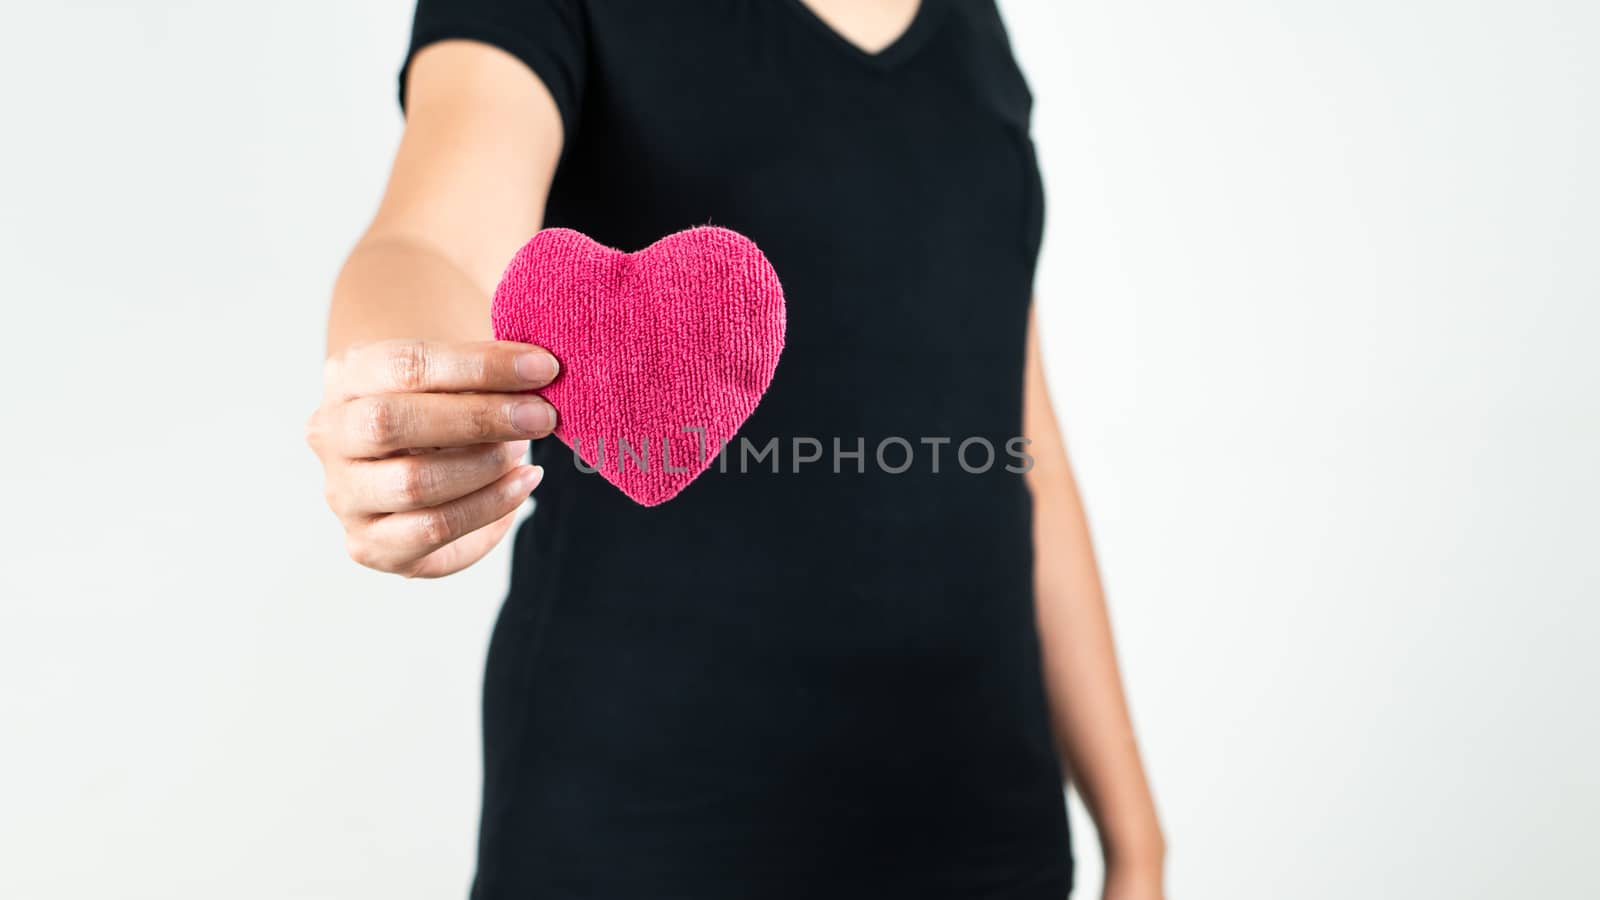 World heart day concept of young woman hand holding red heart